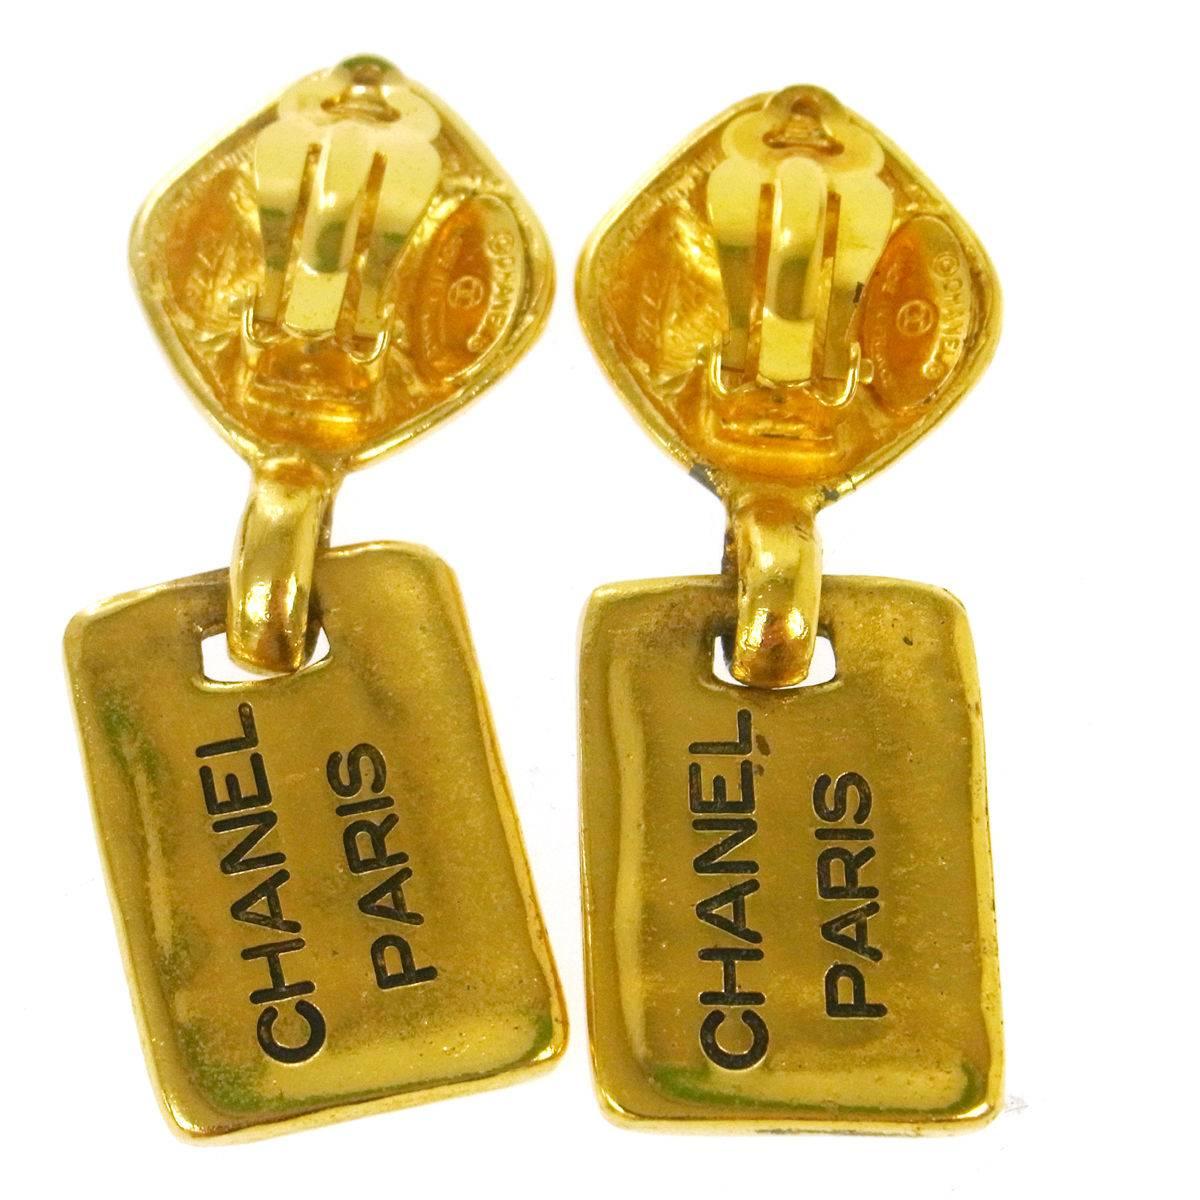 Chanel Vintage Gold Chanel Paris Dangle Drop Evening Earrings

Metal
Gold tone
Clip on closure
Made in France
Width 0.75